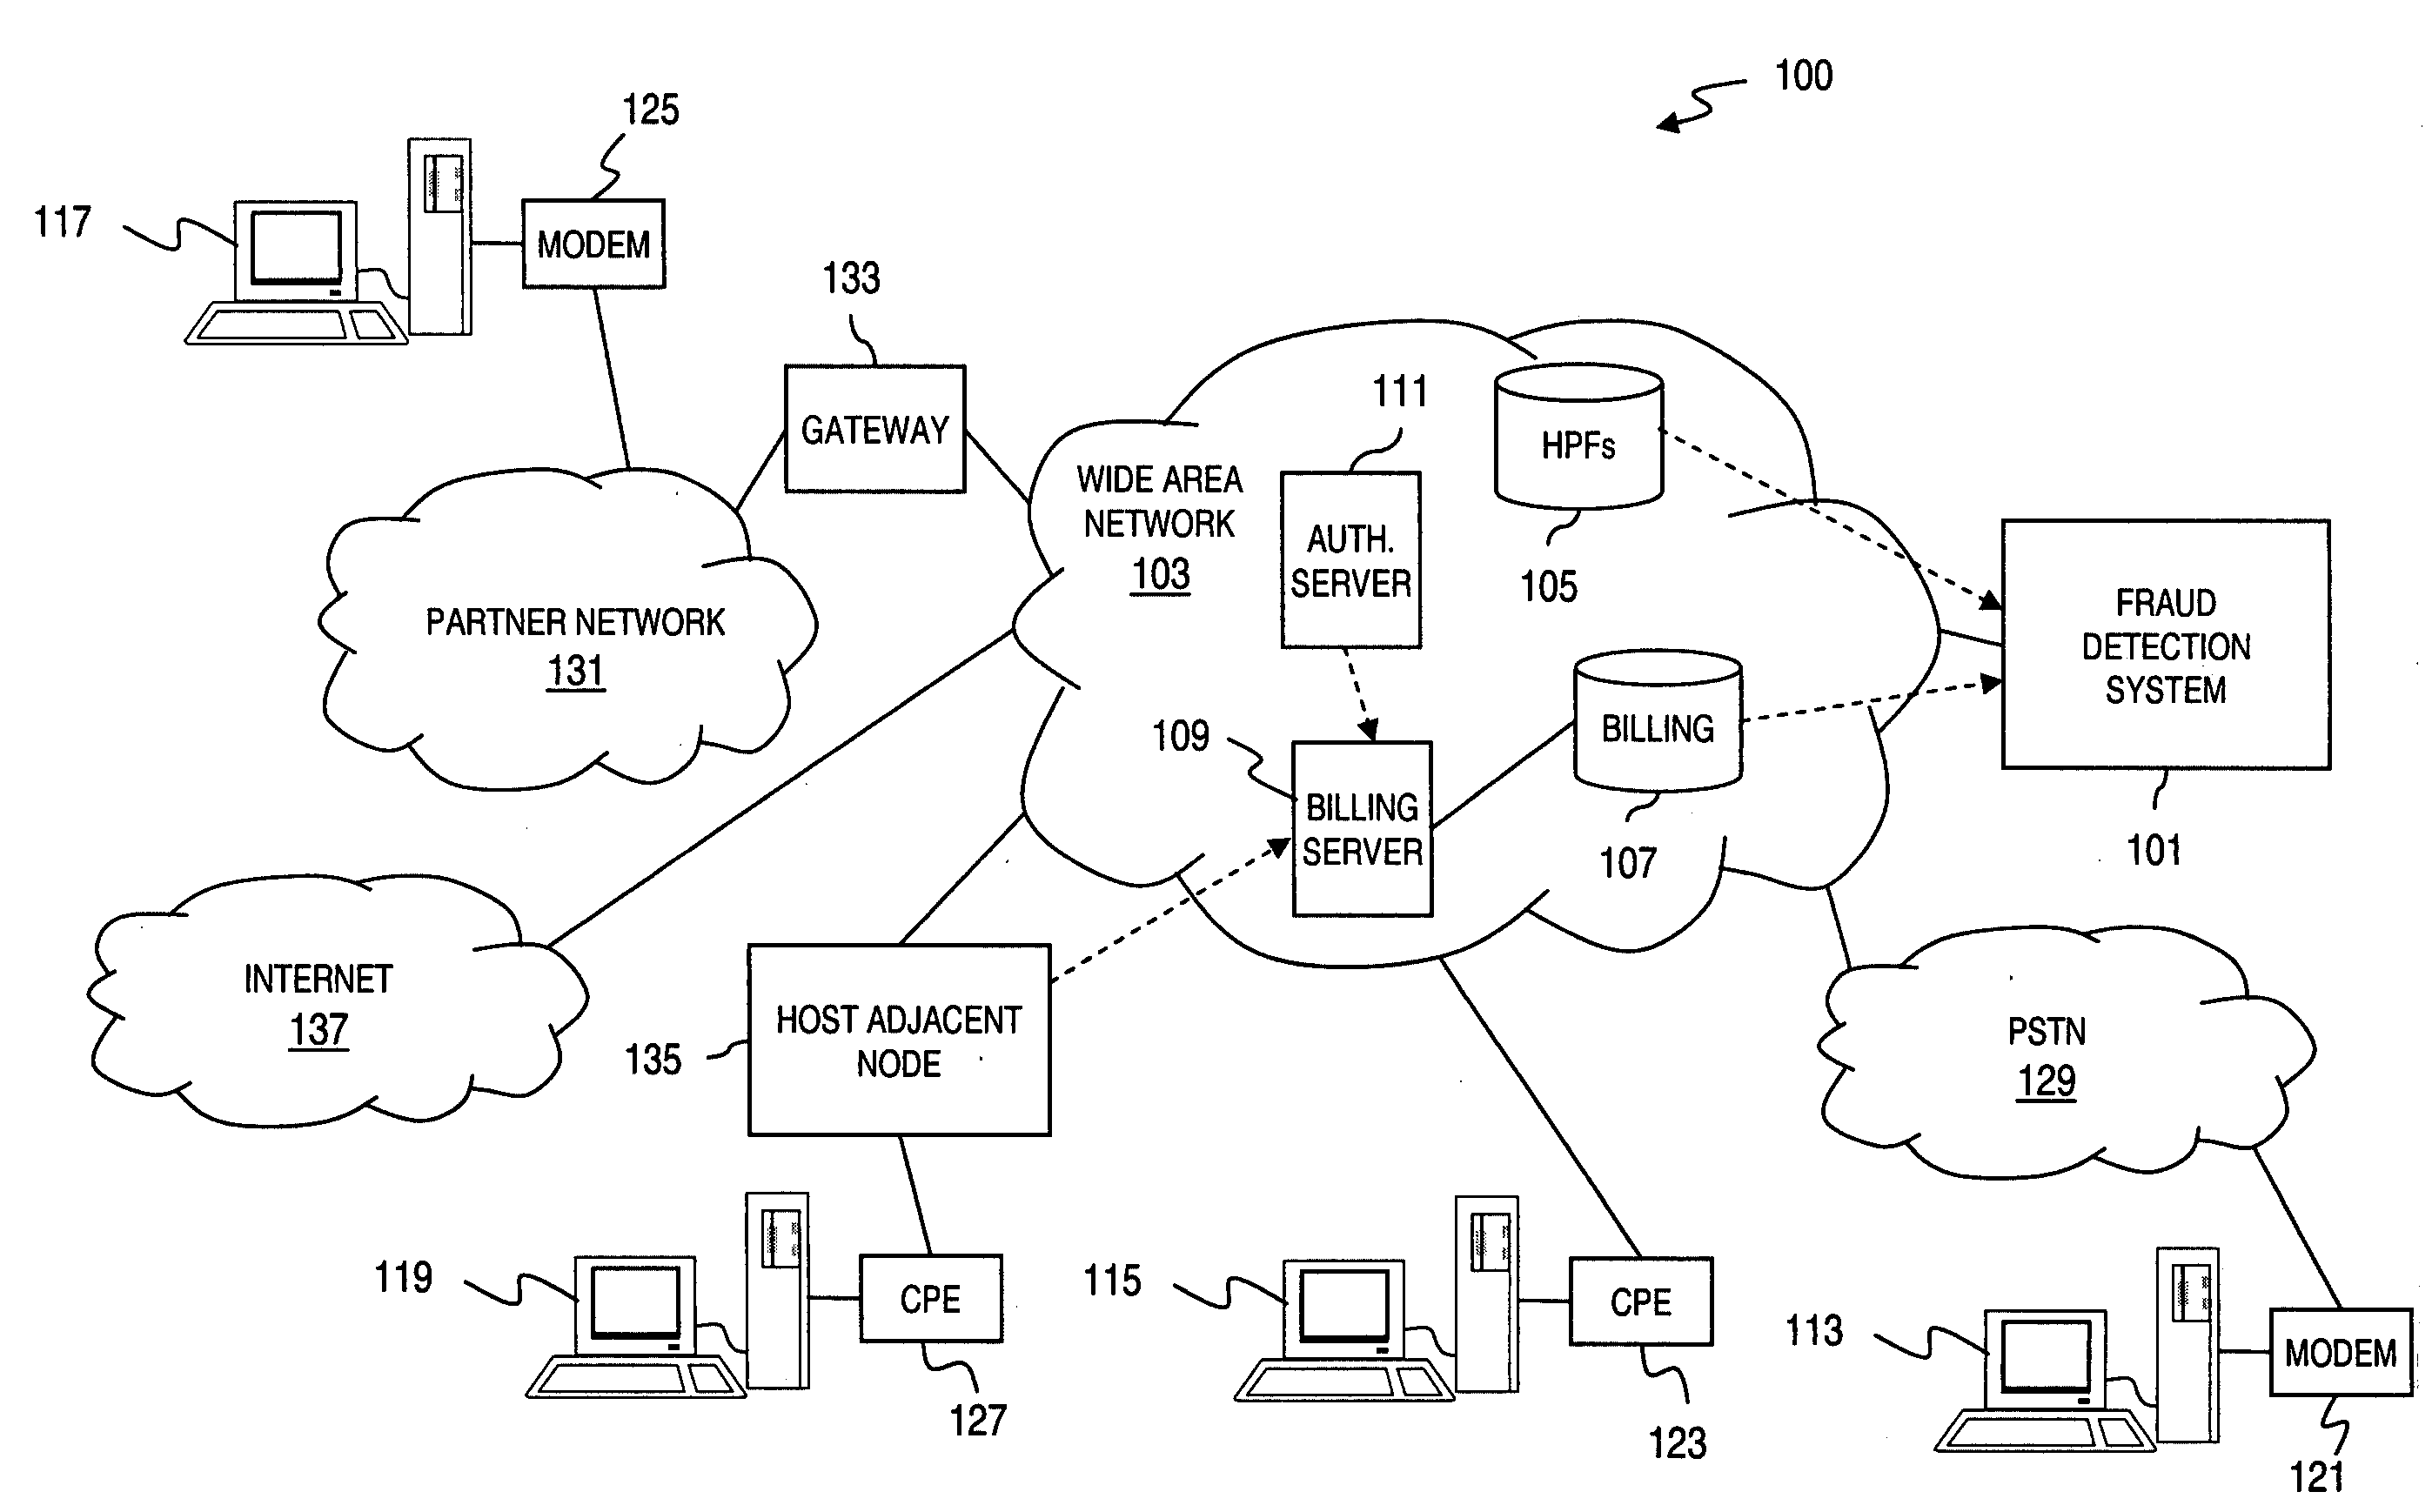 Method and apparatus for providing fraud detection using geographically differentiated connection duration thresholds